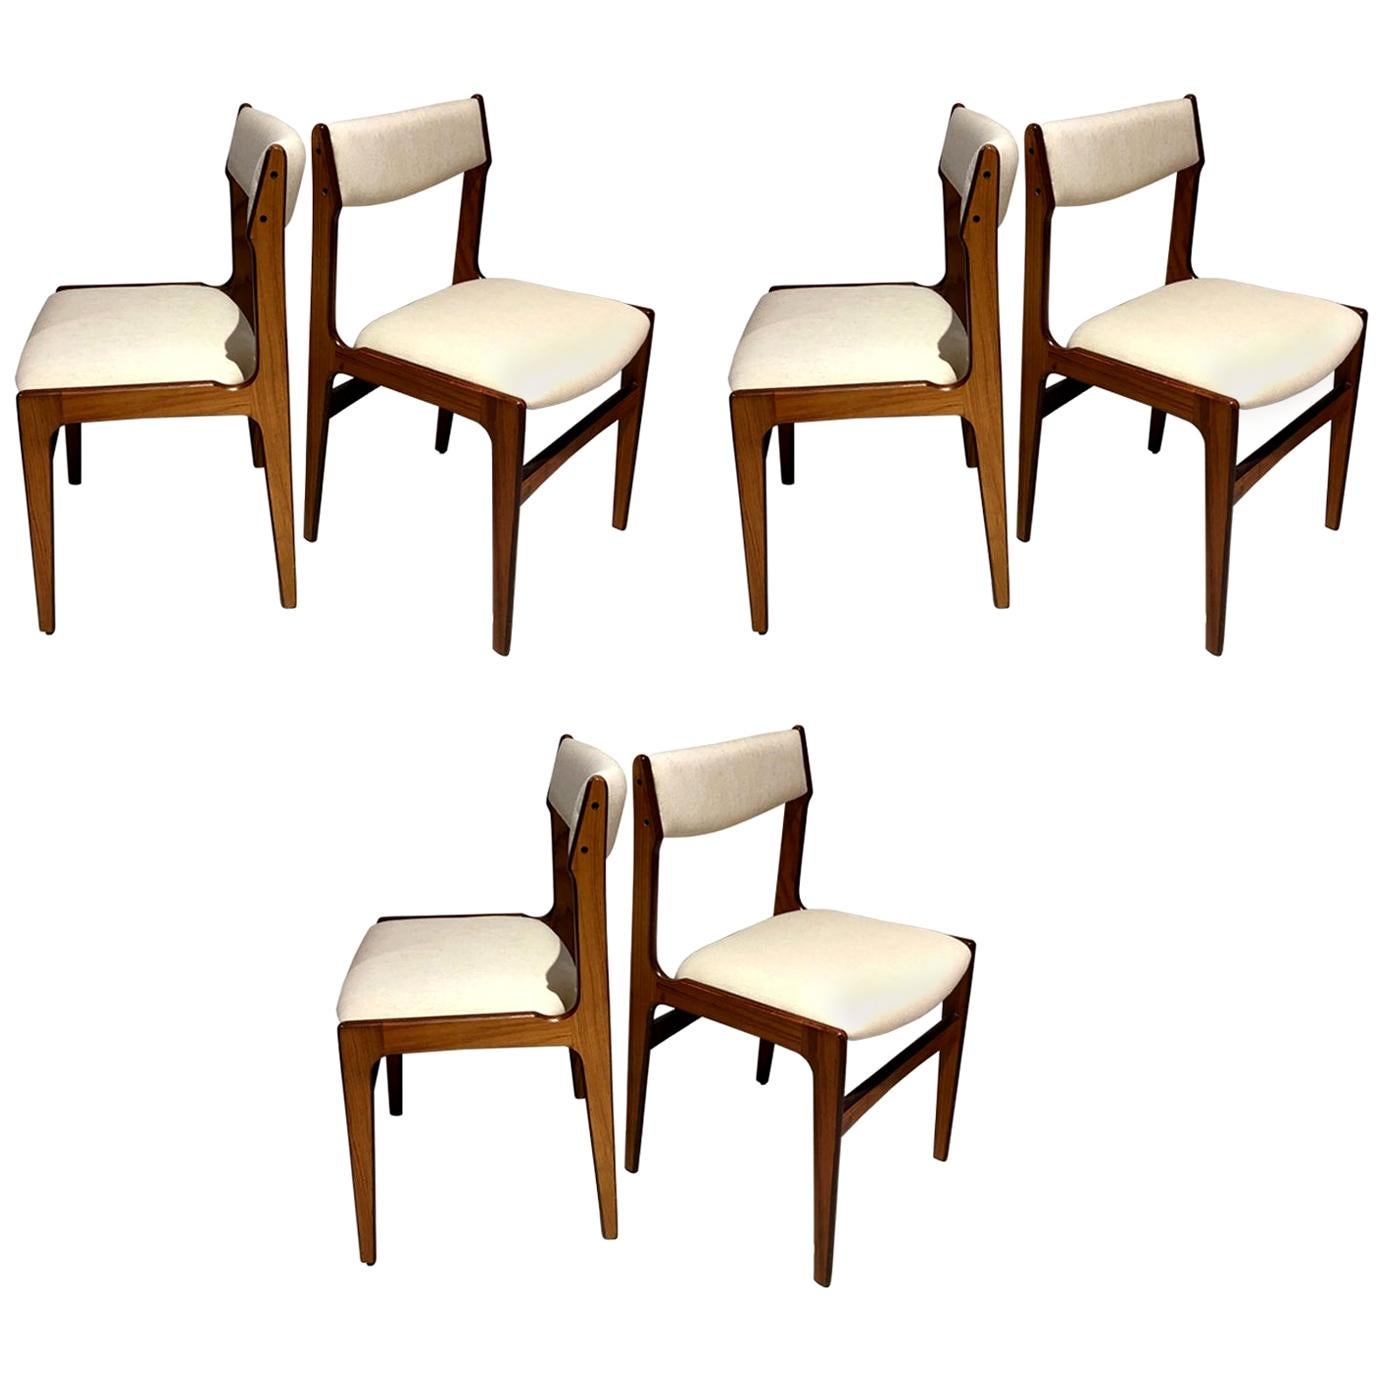 Set of Six Danish Modern Wooden Dining Chairs with White Covers